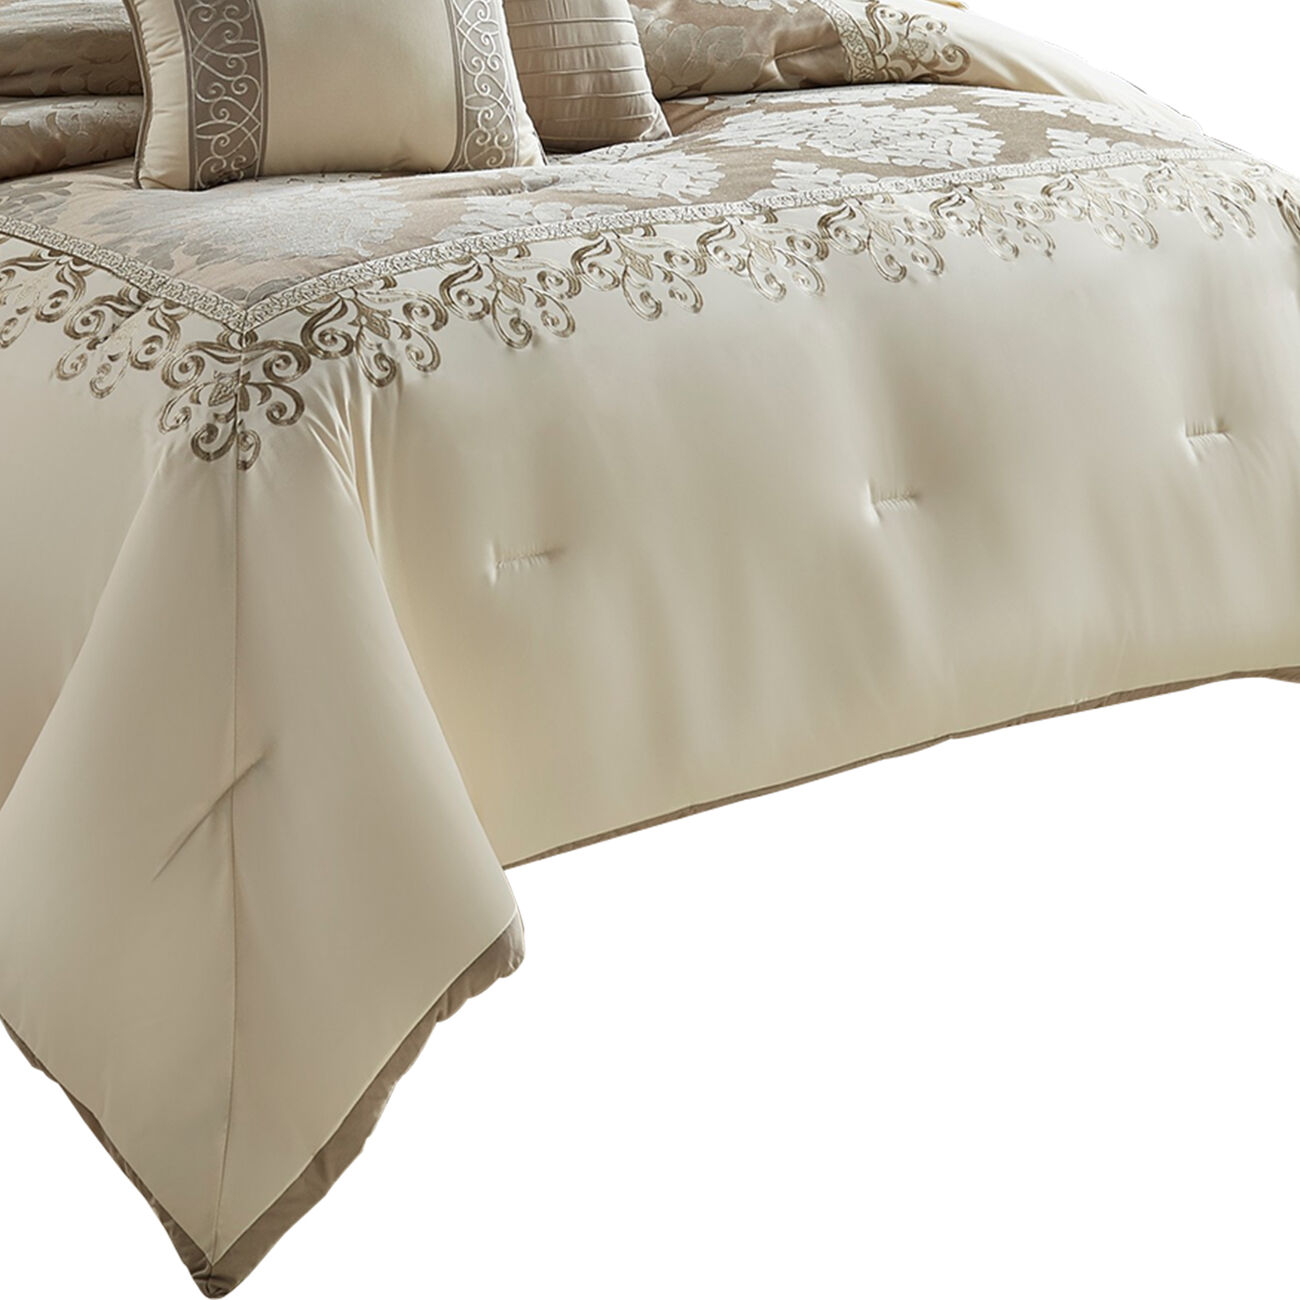 9 Piece Queen Polyester Comforter Set with Damask Print, Cream and Gold